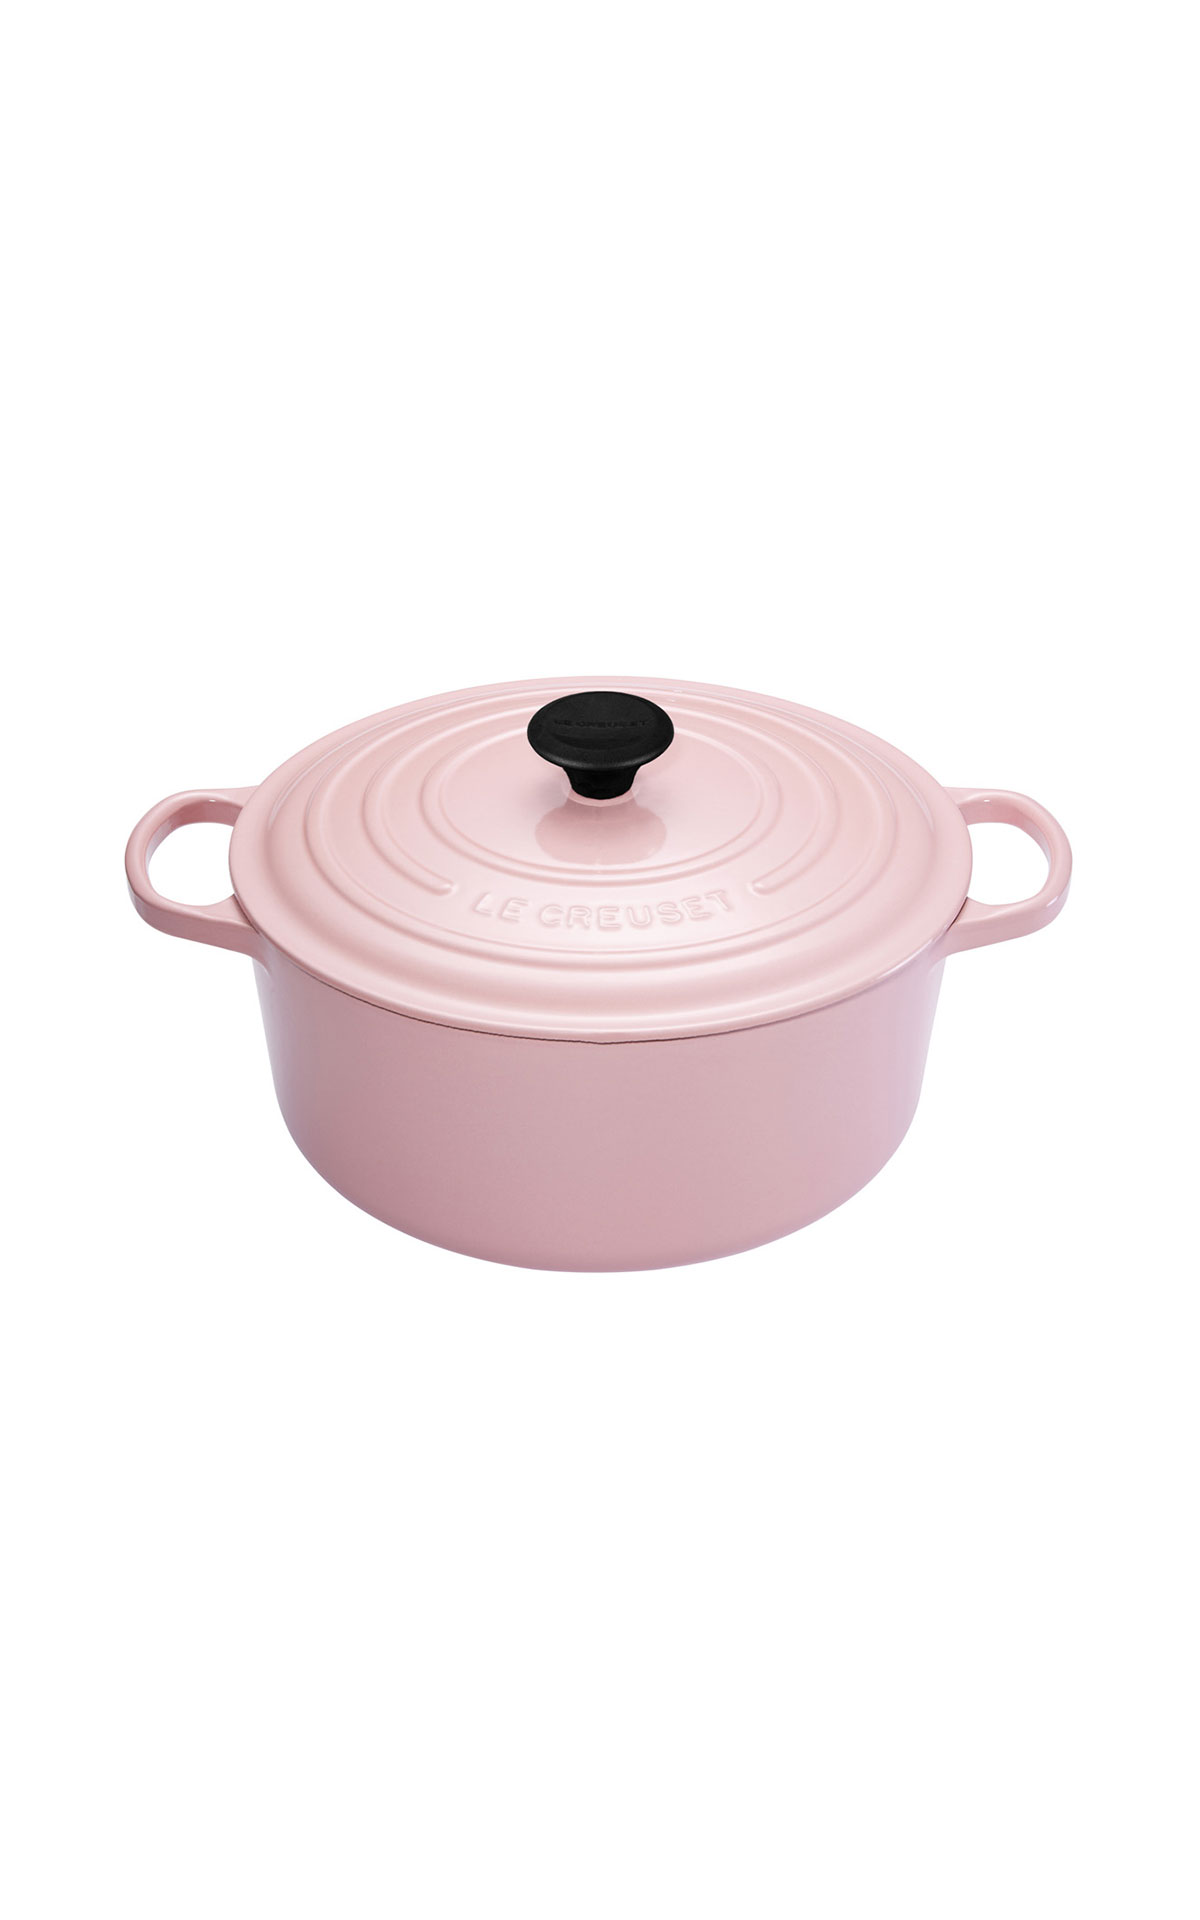 Le Creuset 24cm Round casserole cast iron chiffon pink  from Bicester Village